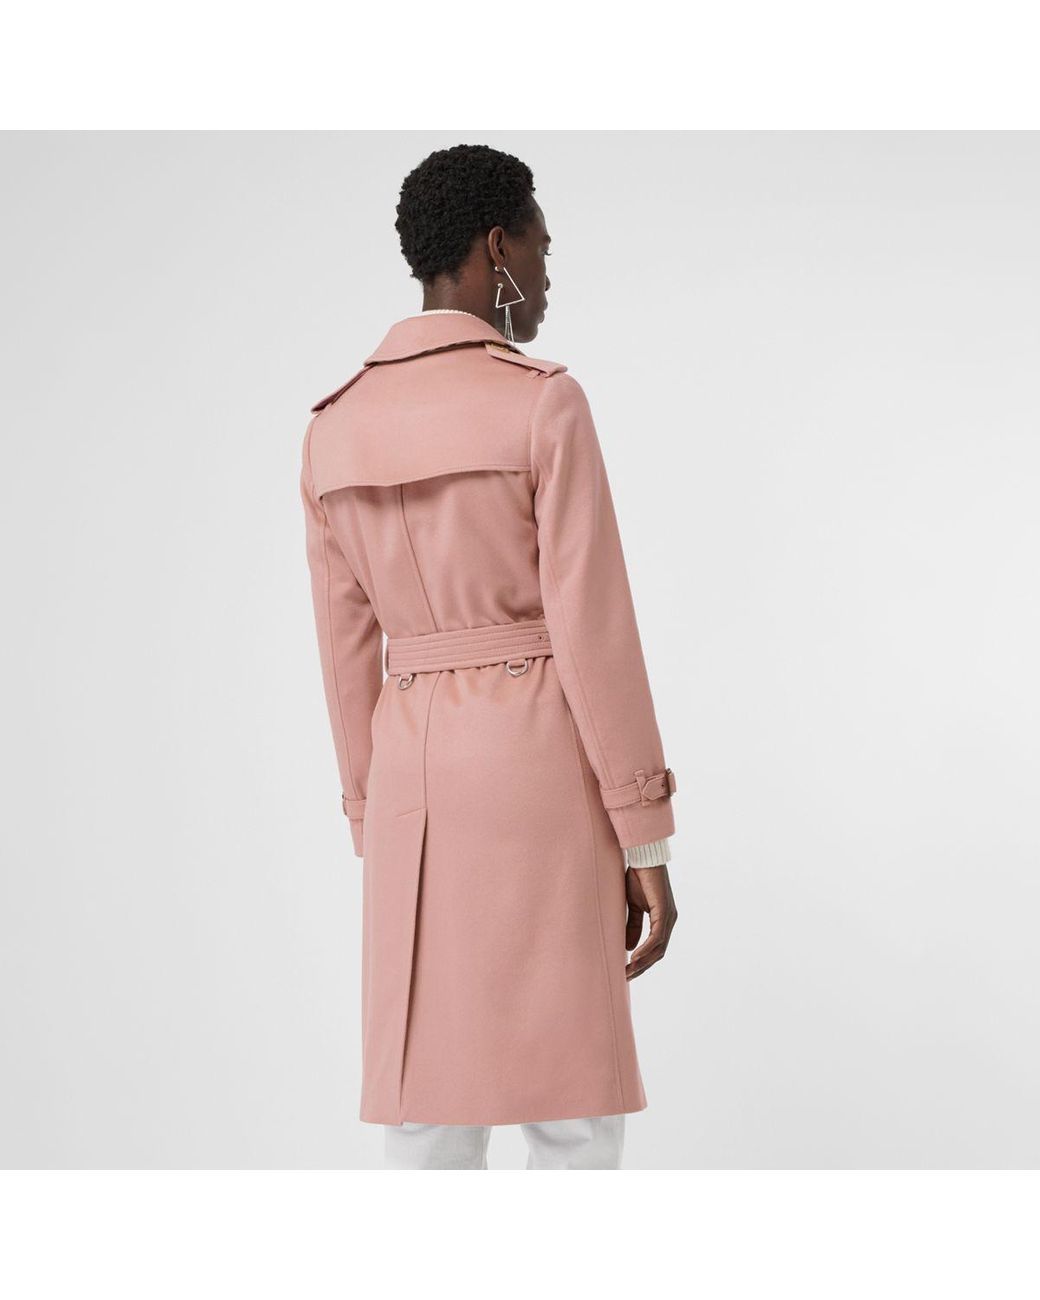 Burberry Cashmere Trench Coat in Chalk Pink (Pink) | Lyst